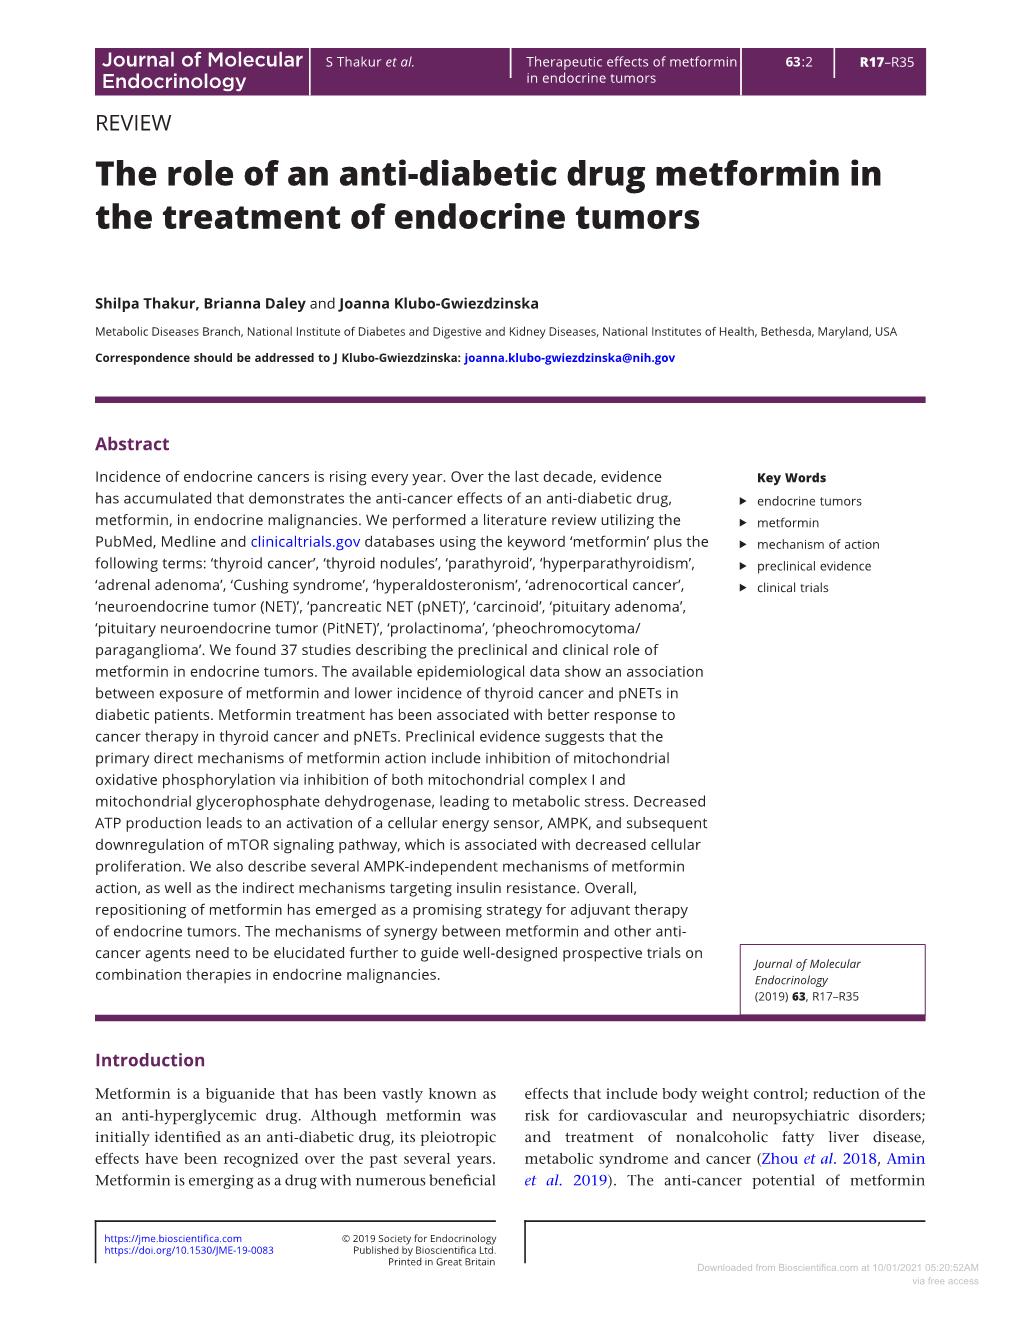 The Role of an Anti-Diabetic Drug Metformin in the Treatment of Endocrine Tumors